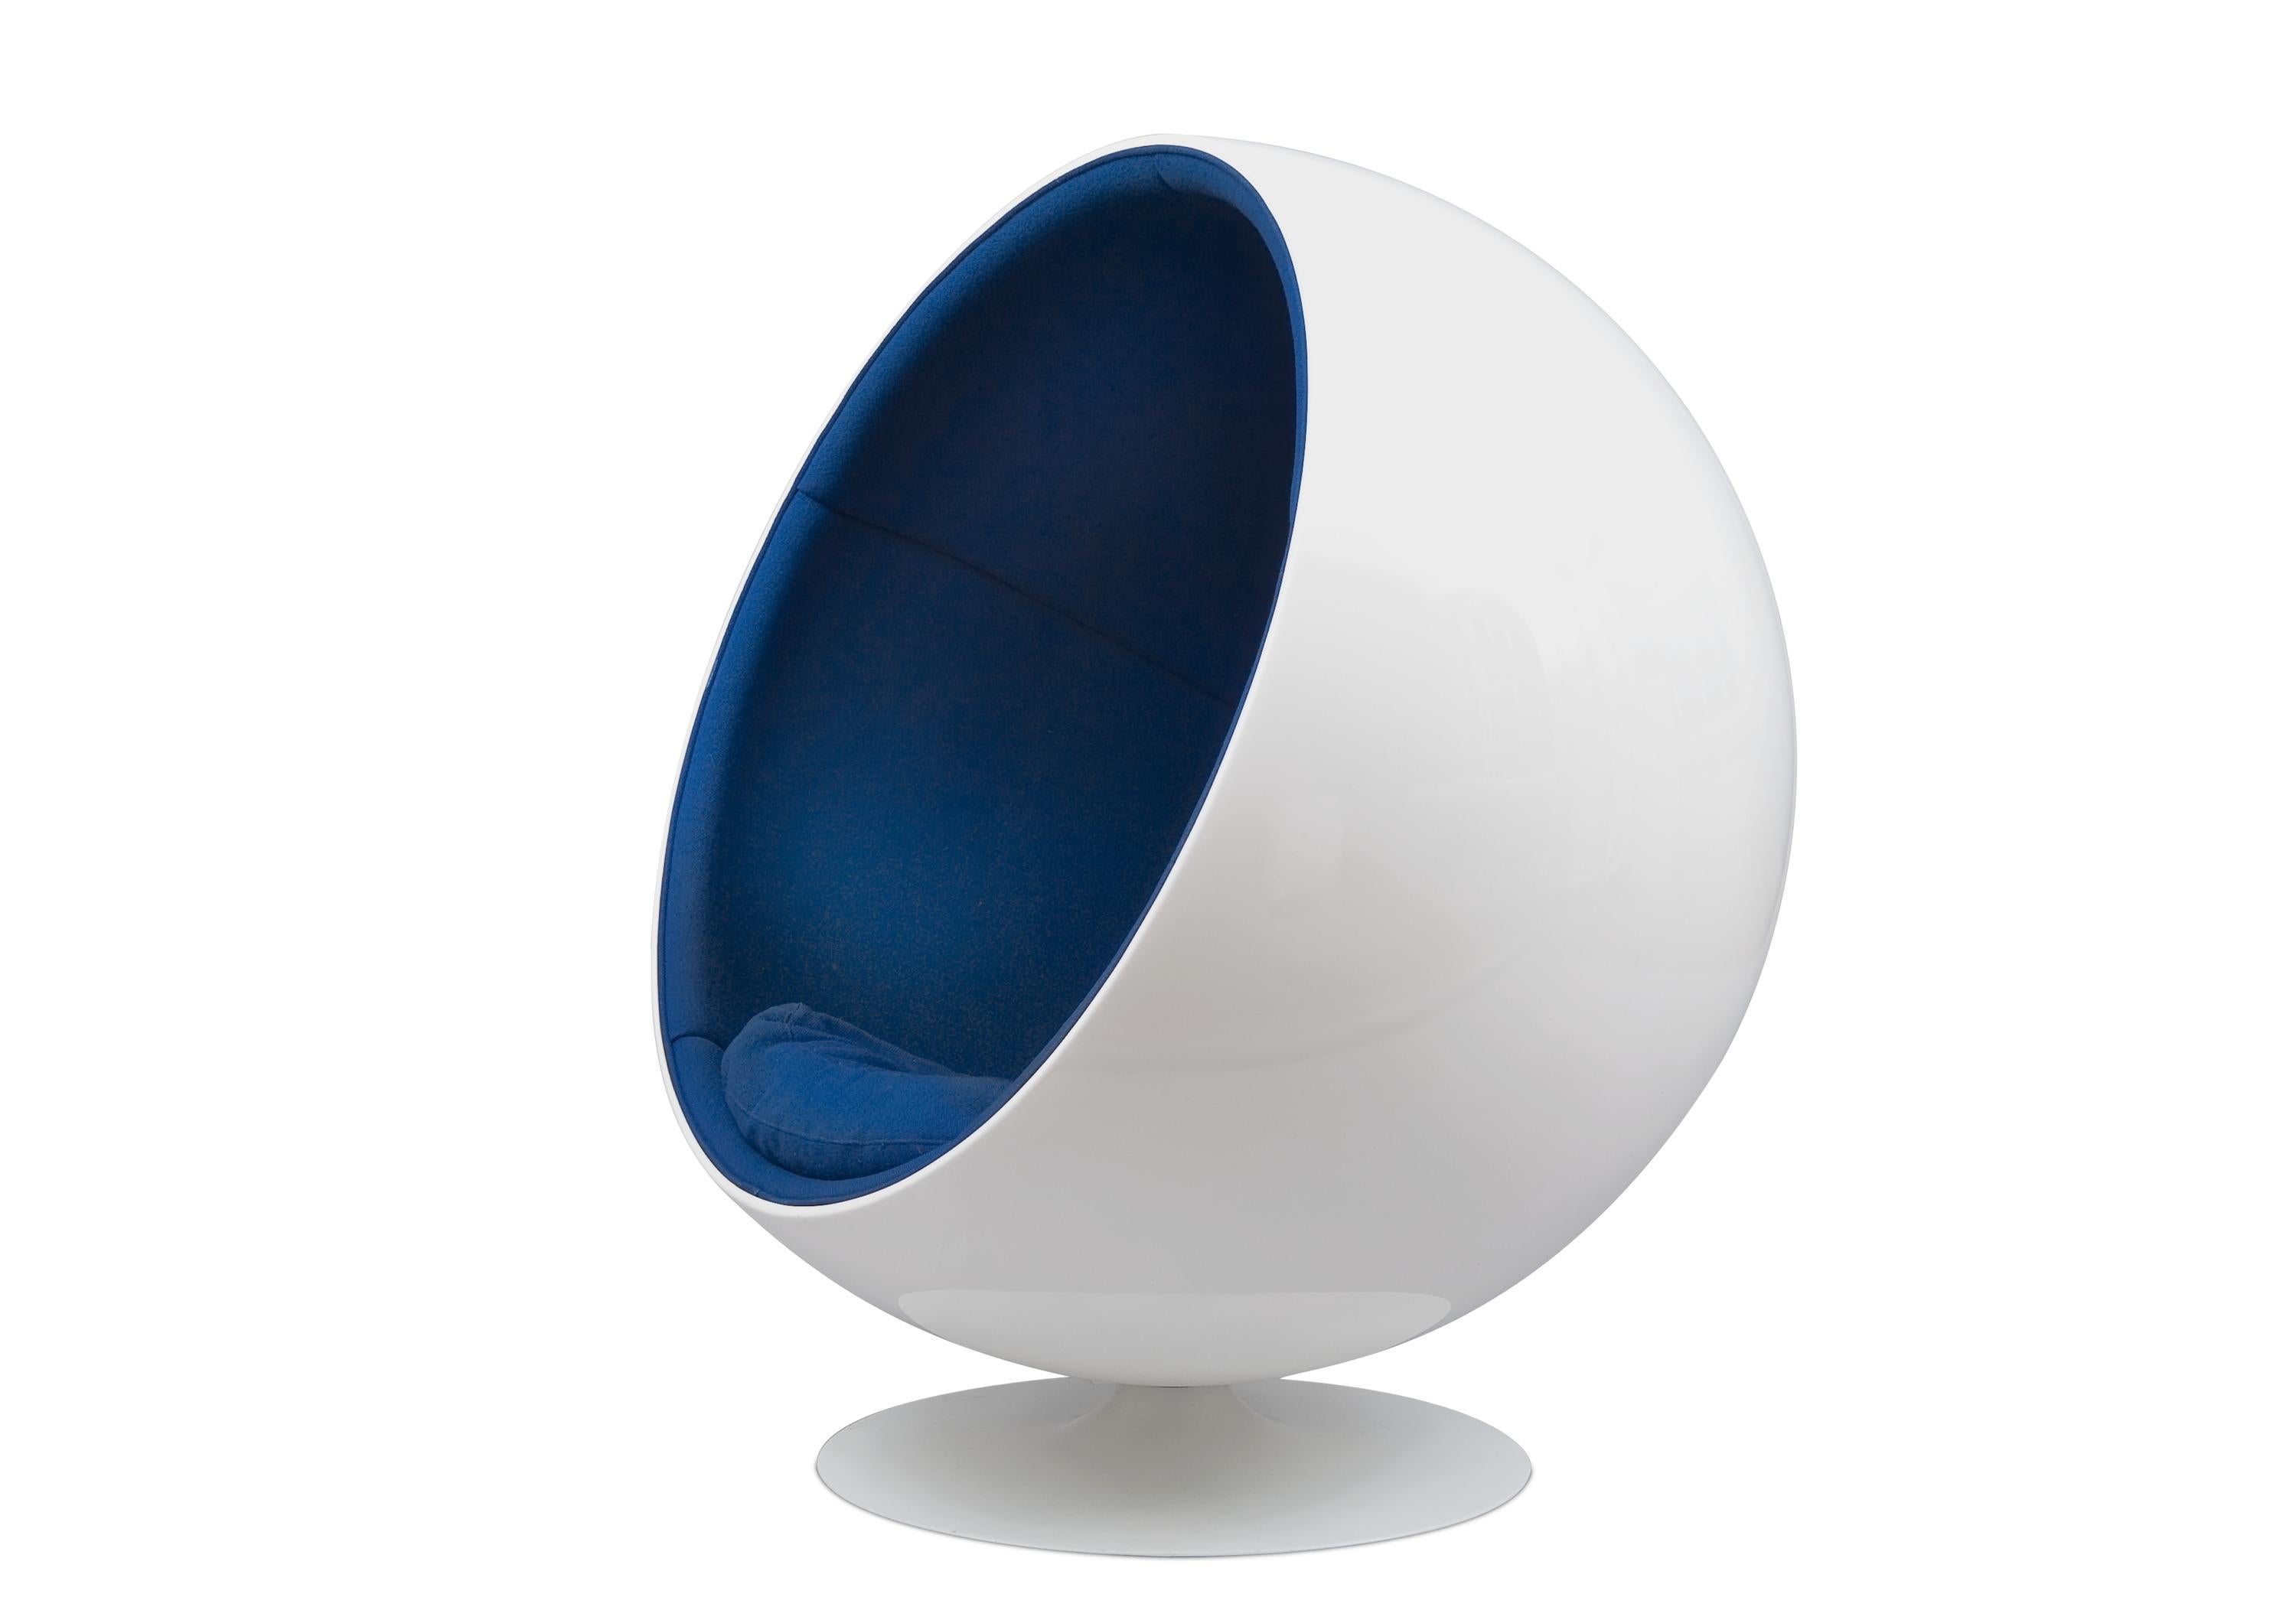 The Ball Chair was designed in 1963 and debuted at the Cologne Furniture Fair in 1966. The chair is one of the most famous and beloved classics of Finnish design and it was the international breakthrough of Eero Aarnio. The Ball Chair can be found